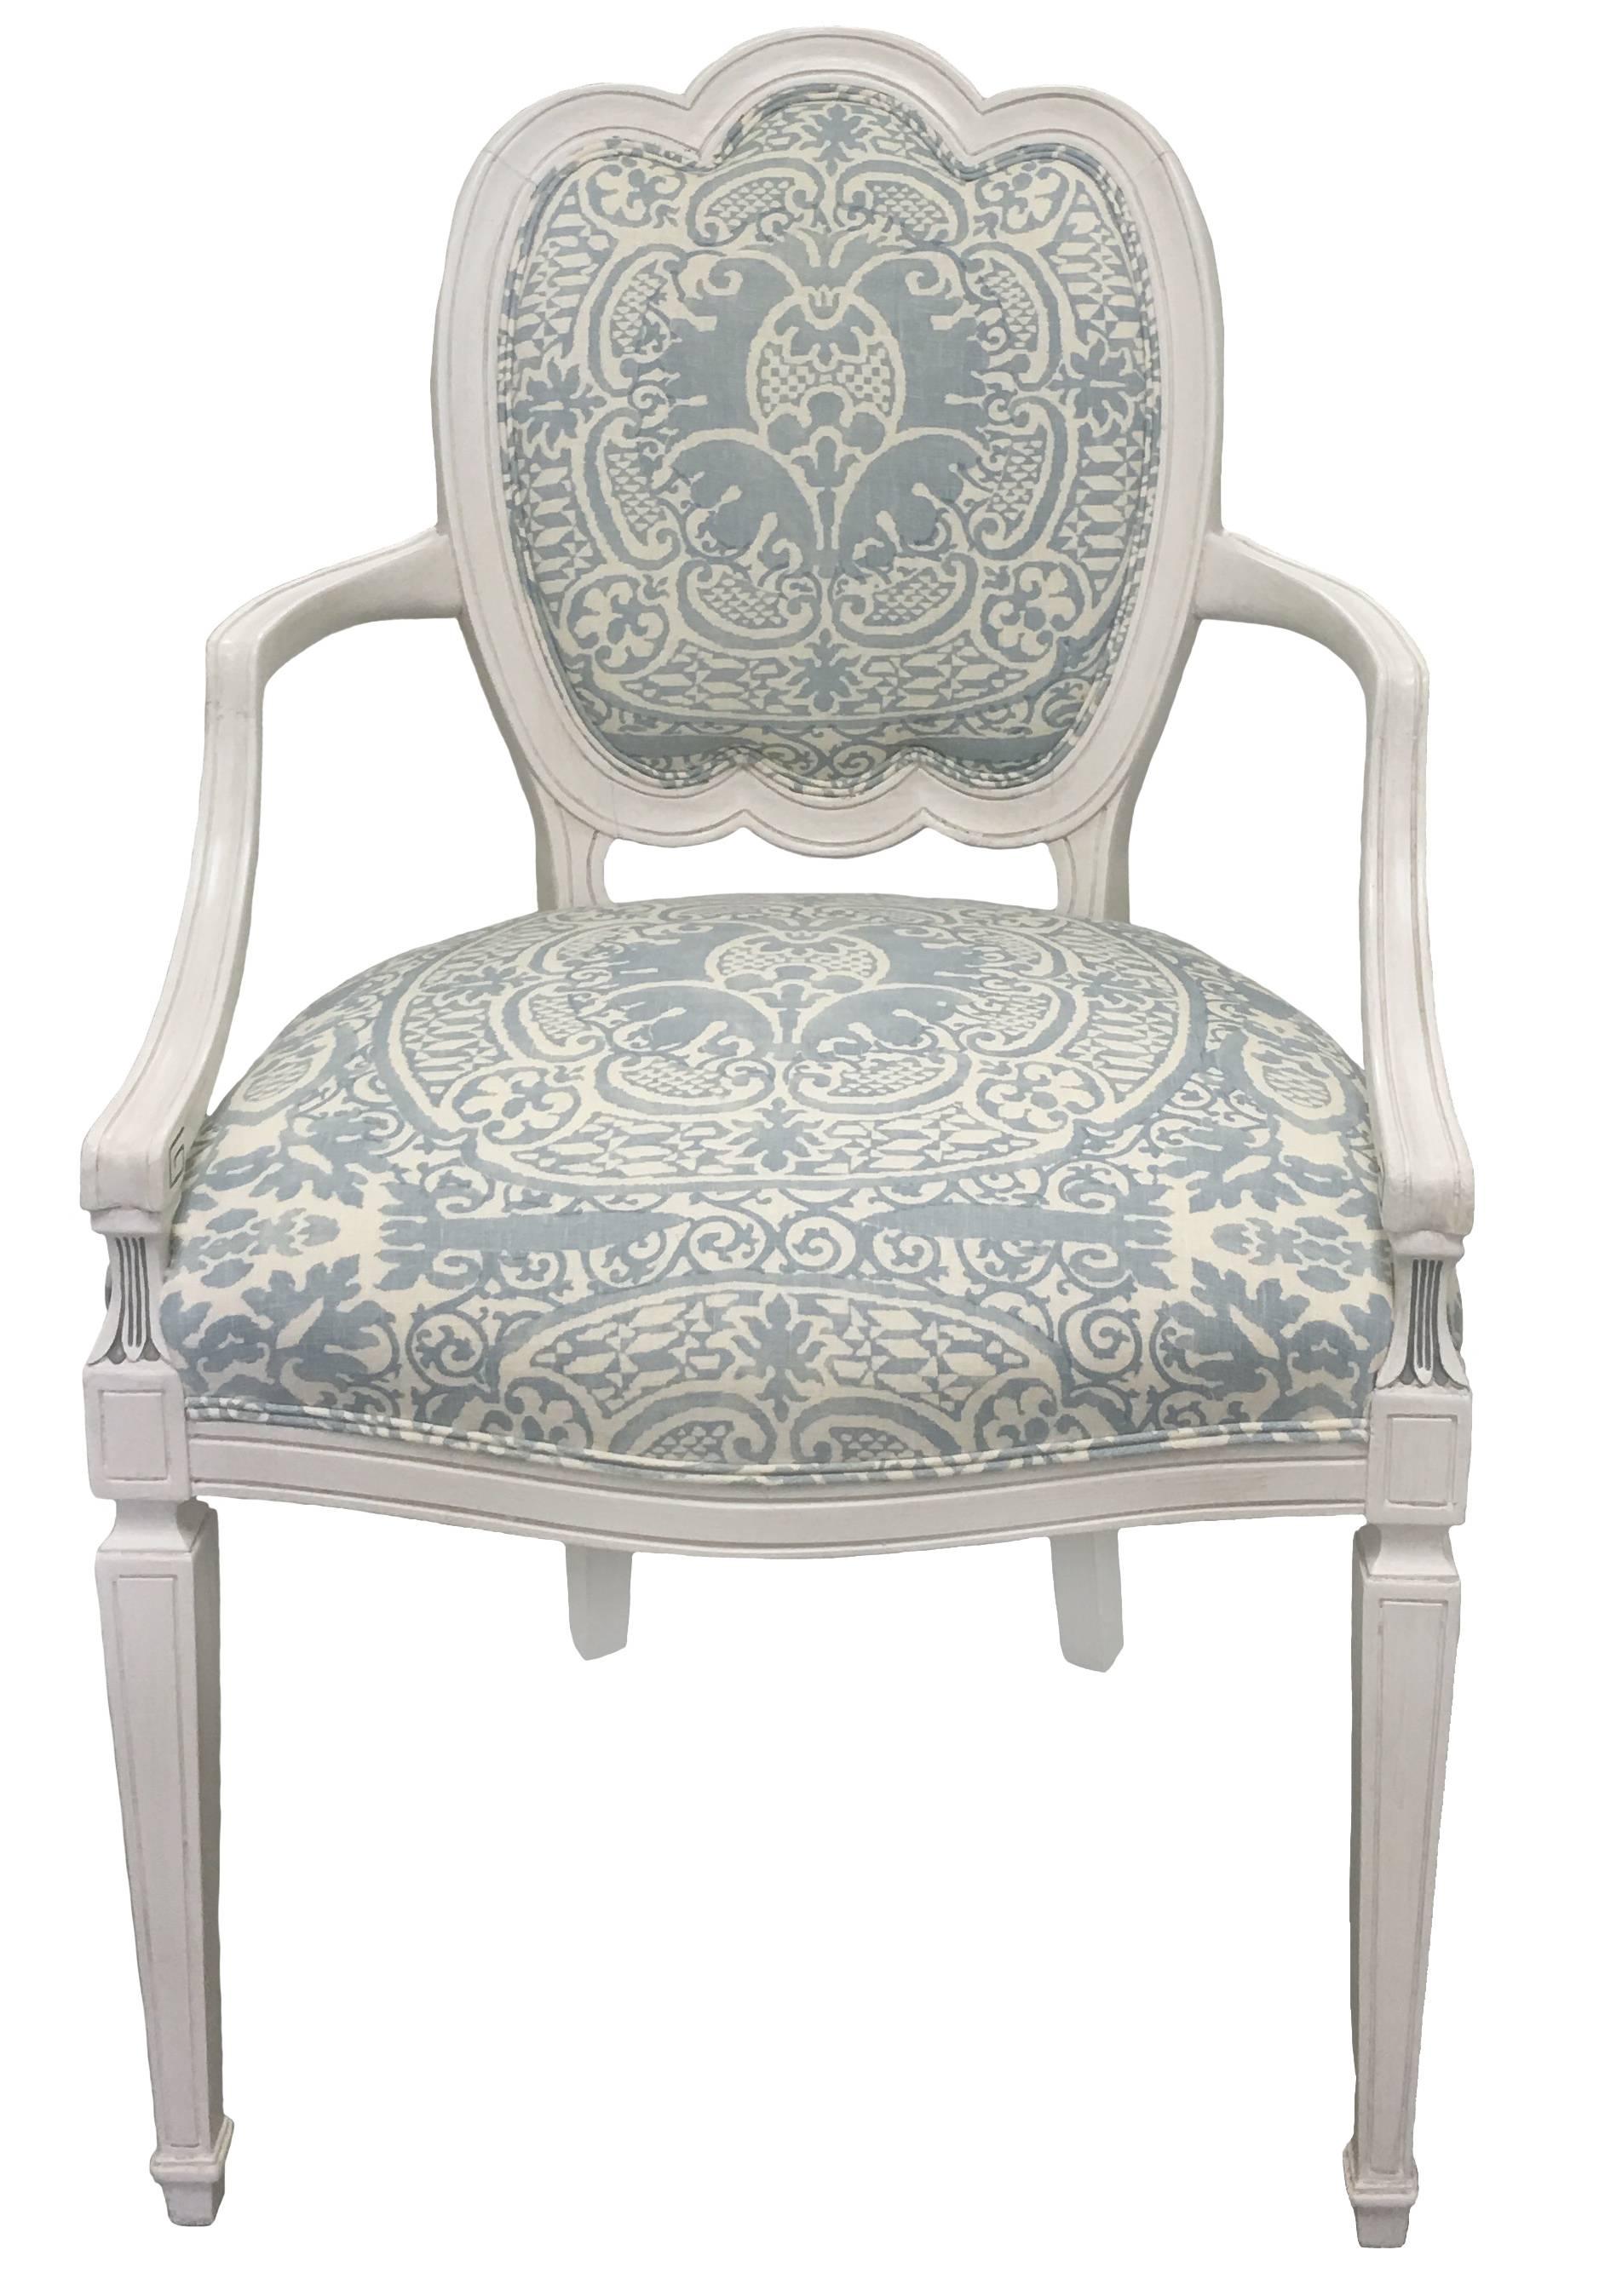 American Pair of White Hepplewhite Style Quadrille Upholstered Armchairs